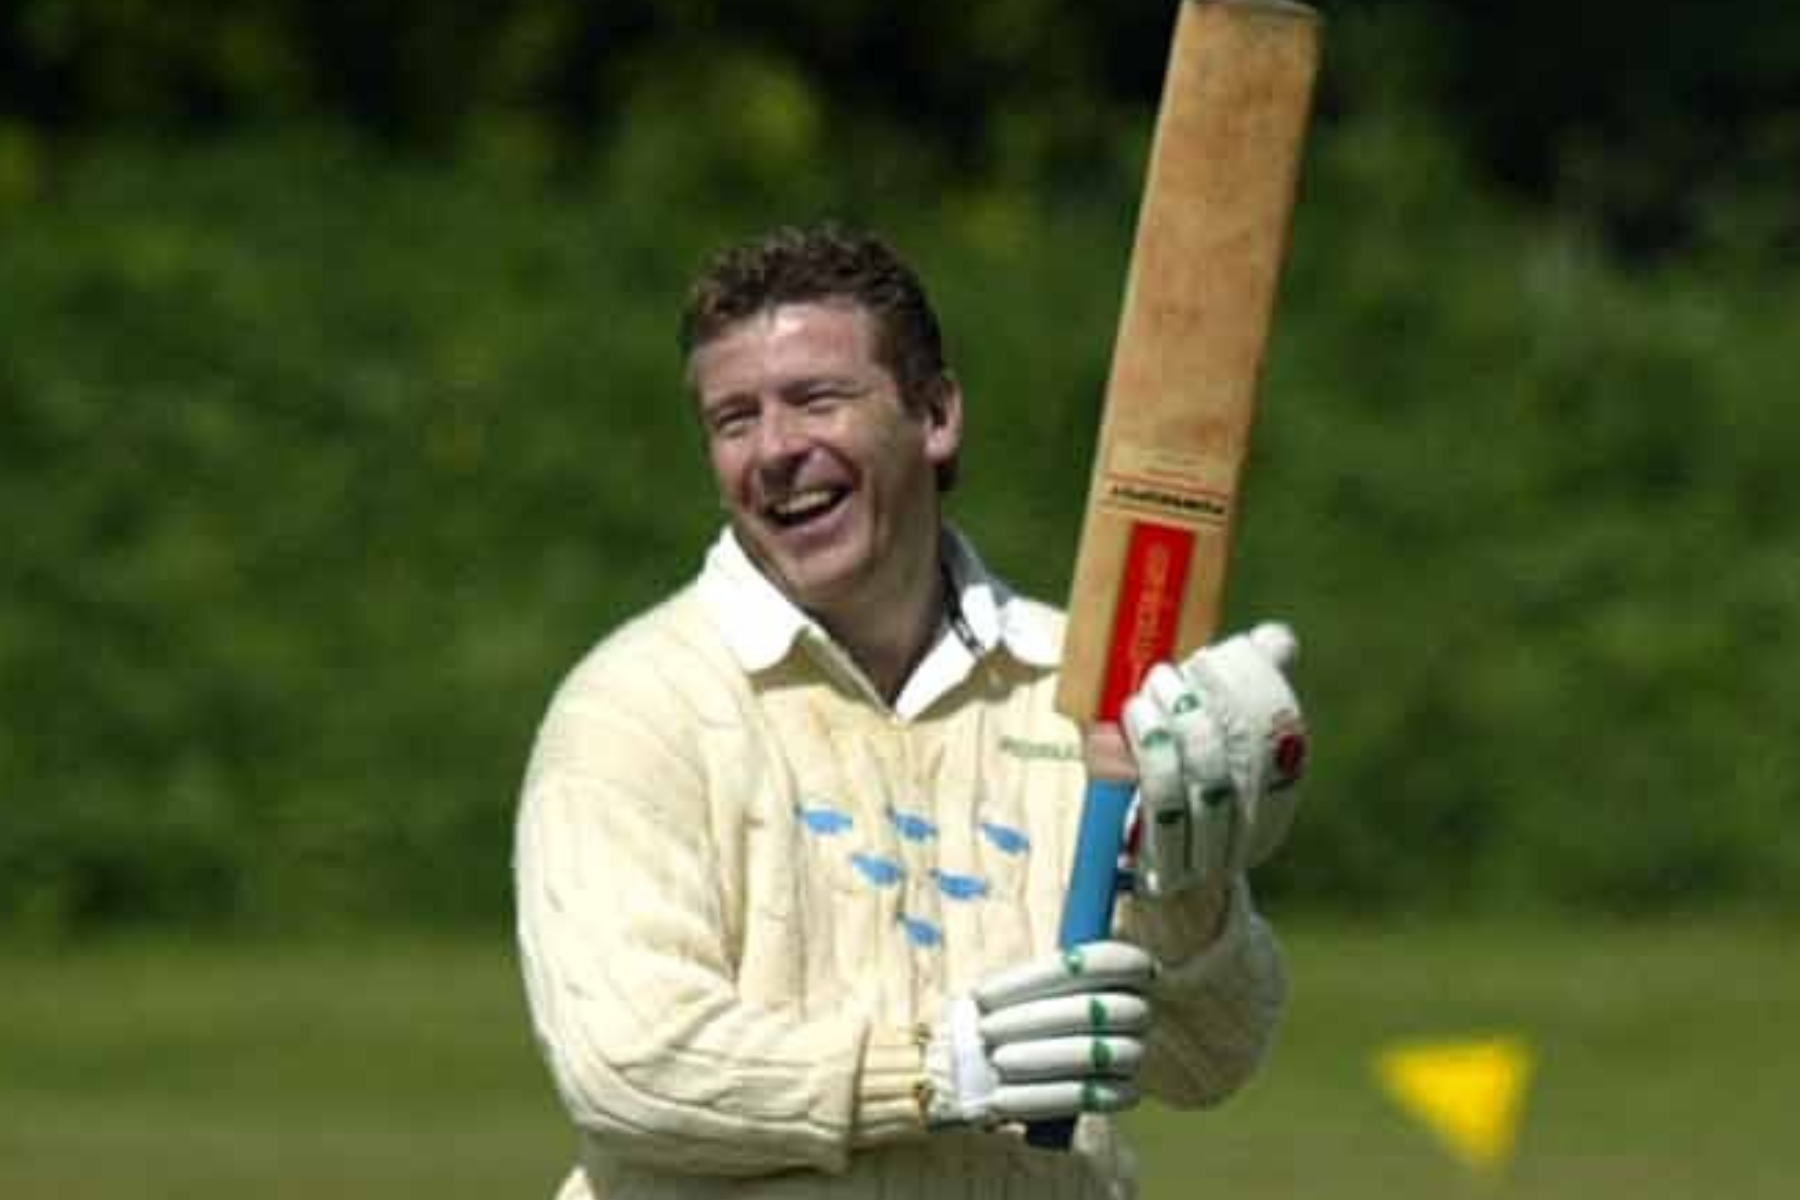 Former Scottish cricketer pays tribute to late Rangers hero Andy Goram